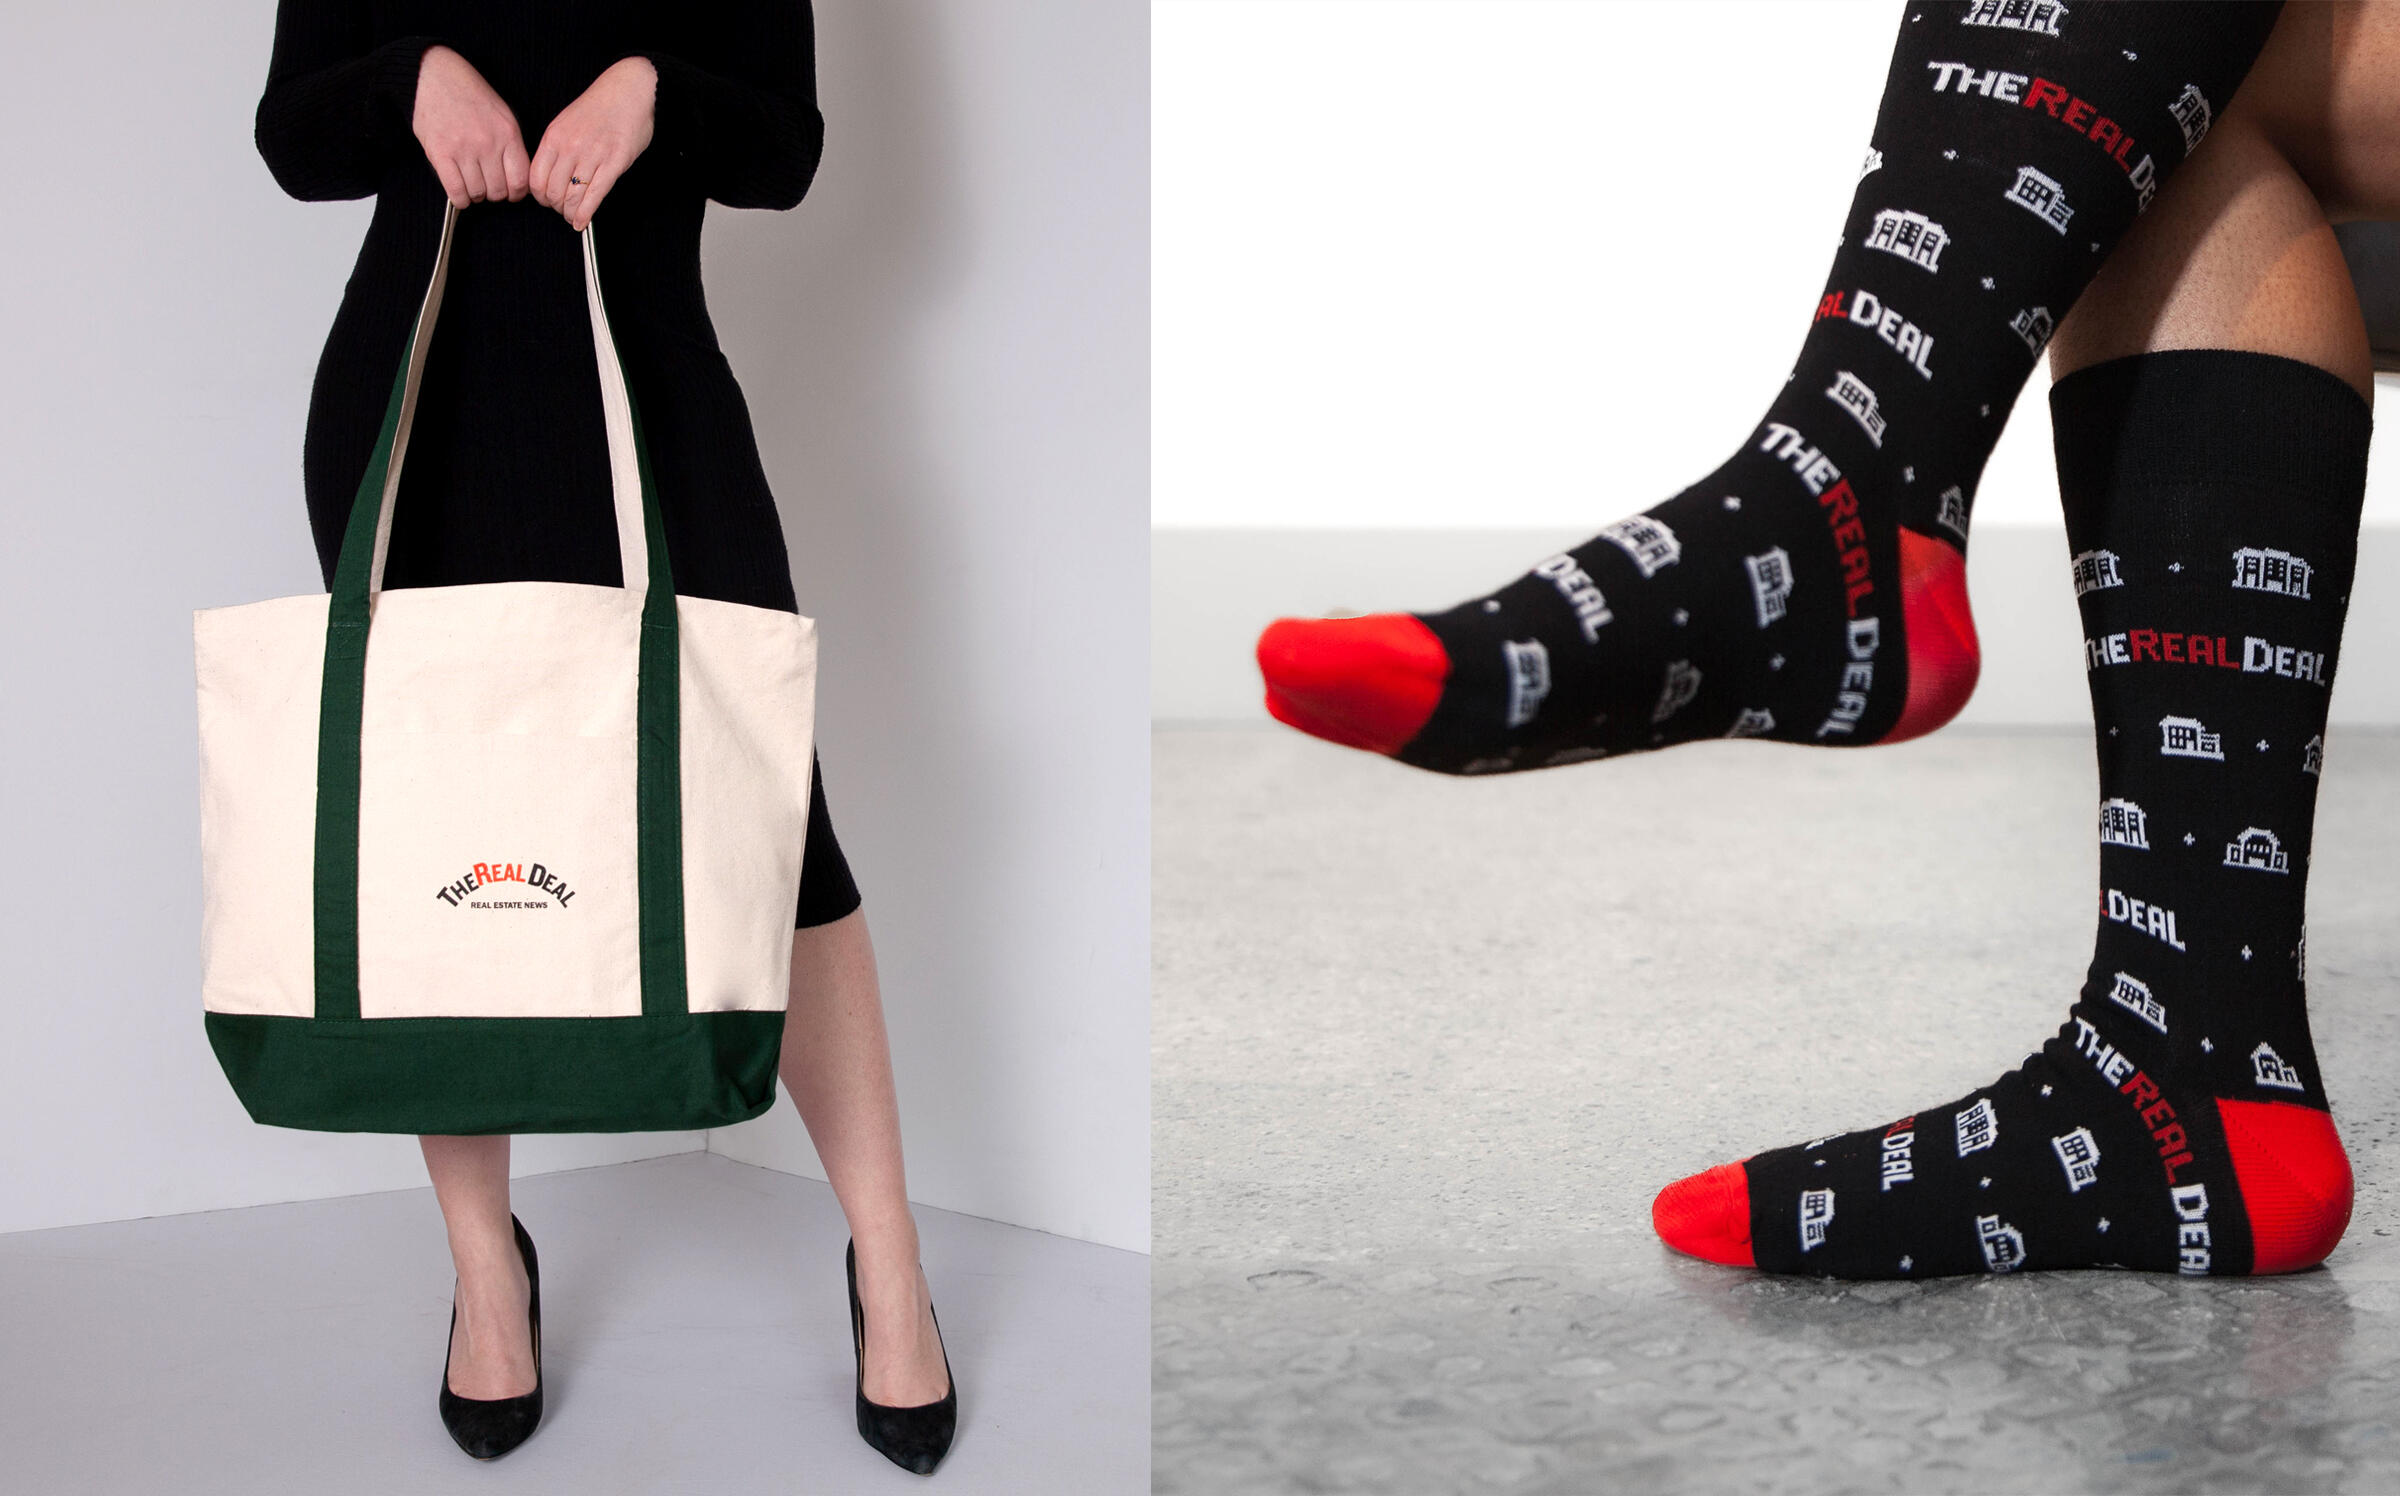 Hustle in style with official TRD totes and socks